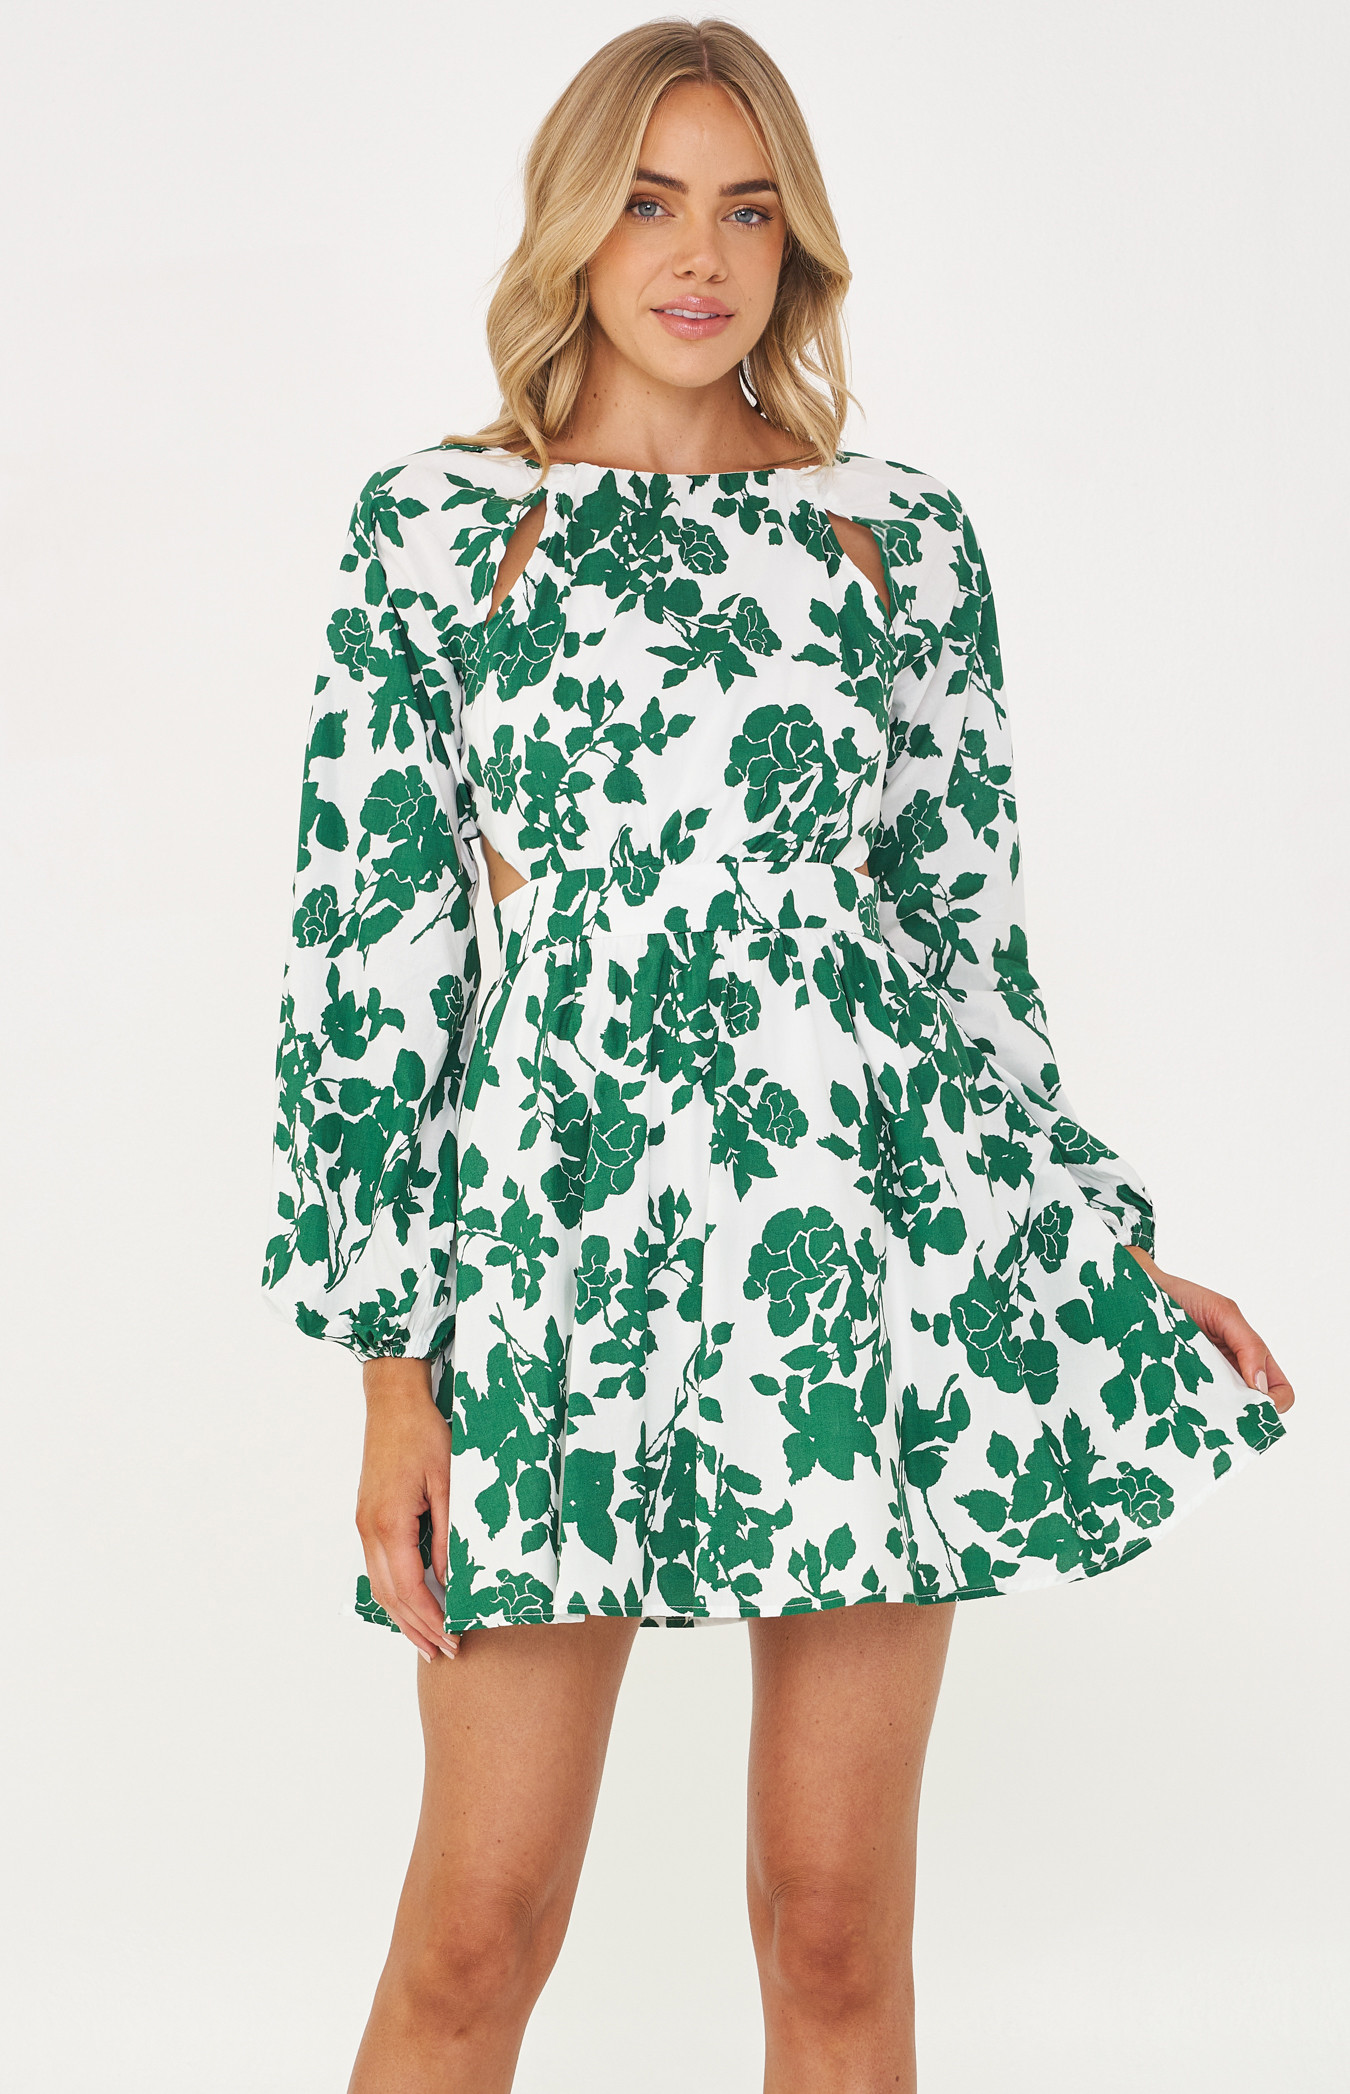 Printed Mini Dress with Waist Cut Out Details (SDR1237A)